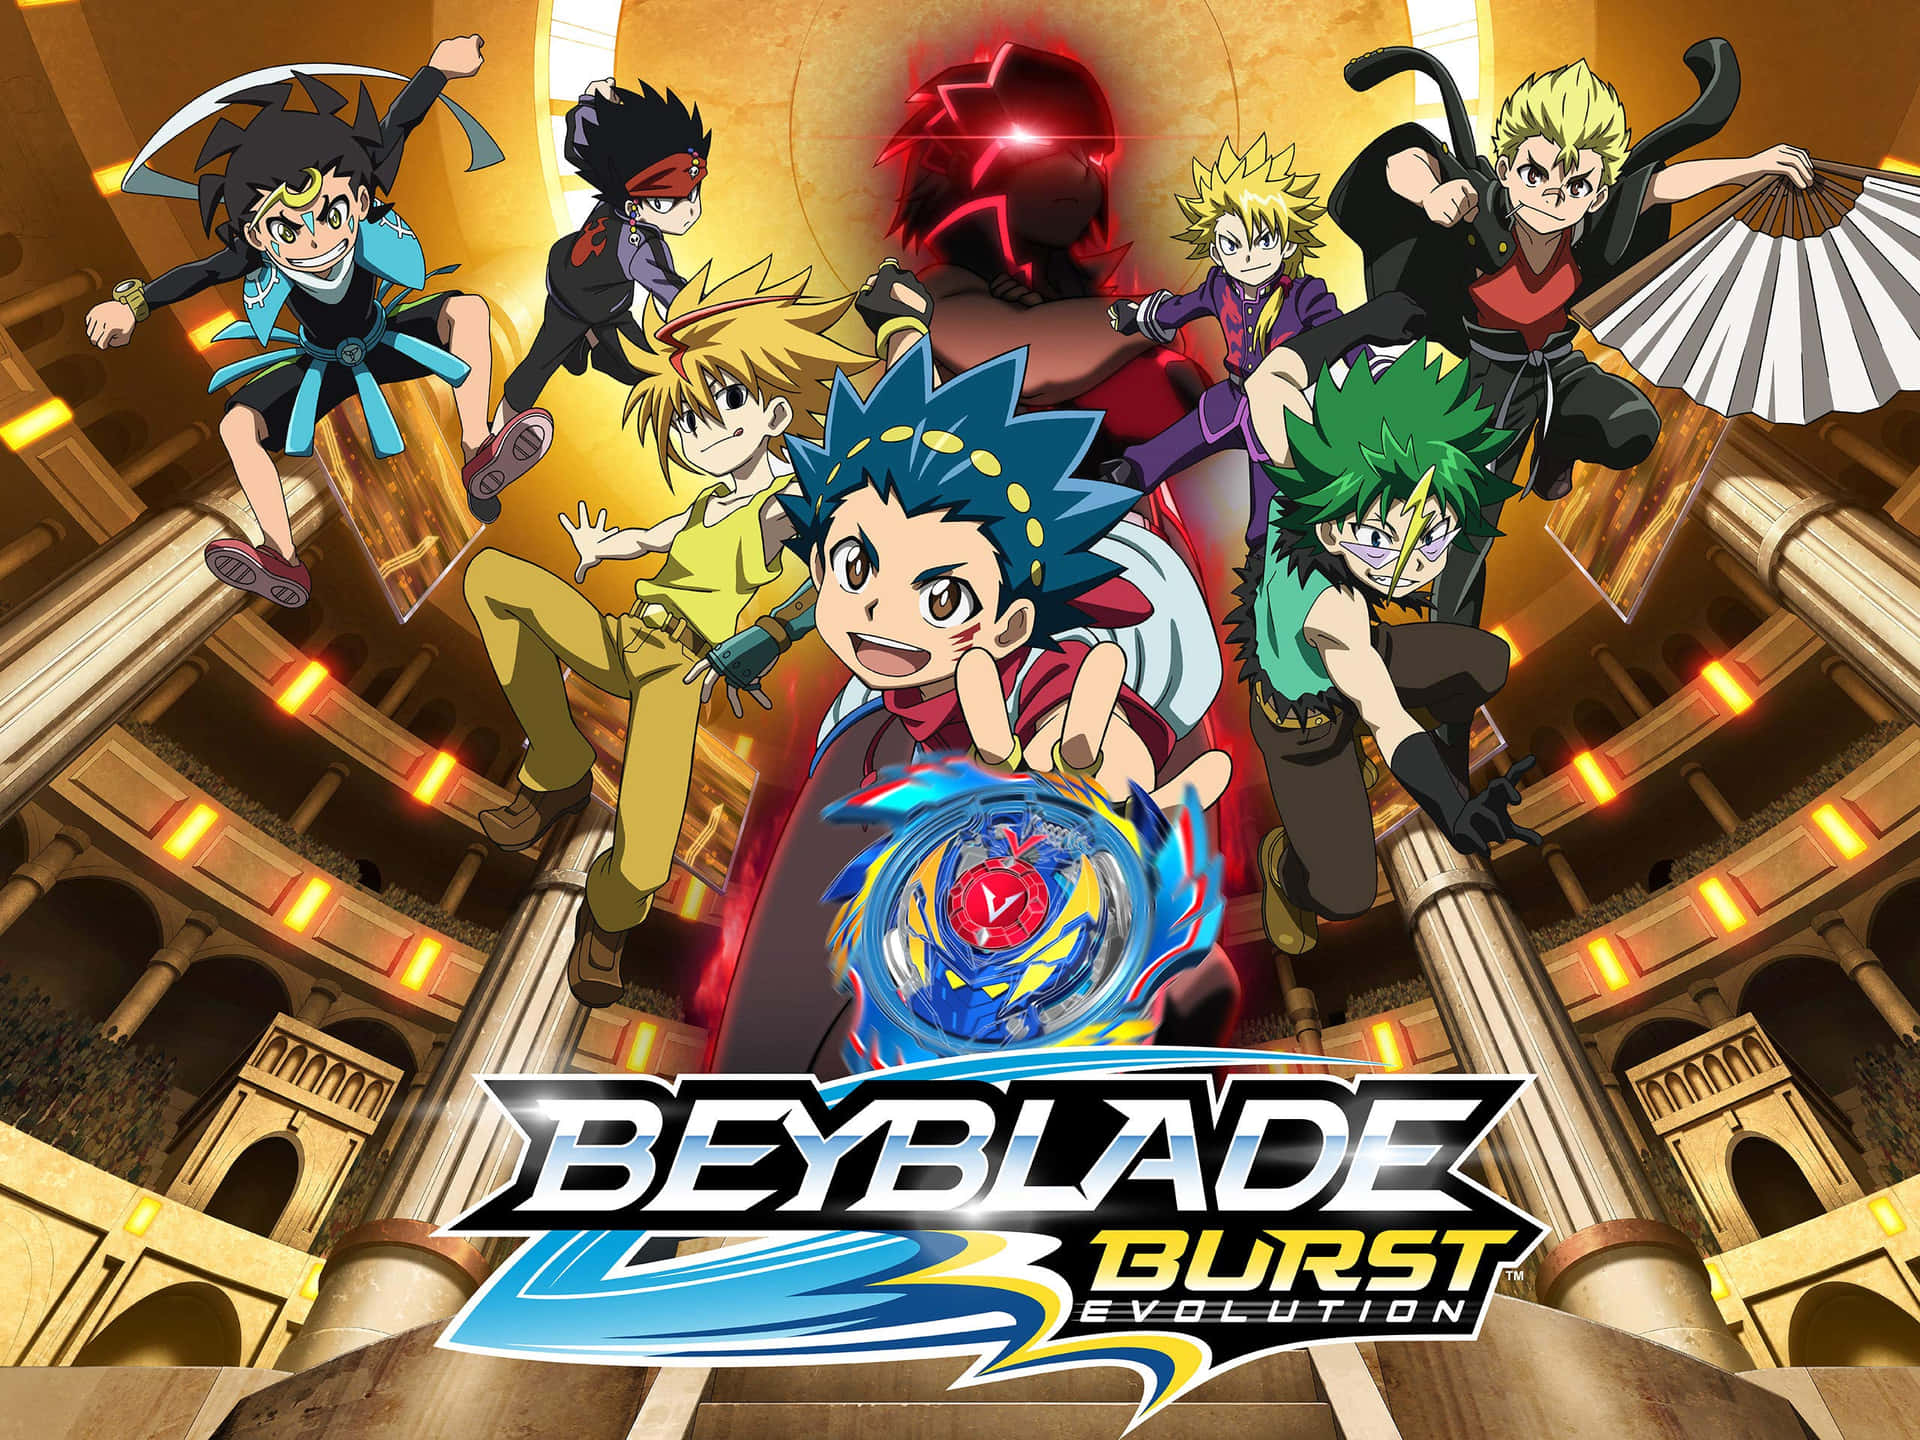 Image  "Test Your Skills With Beyblade Burst!"